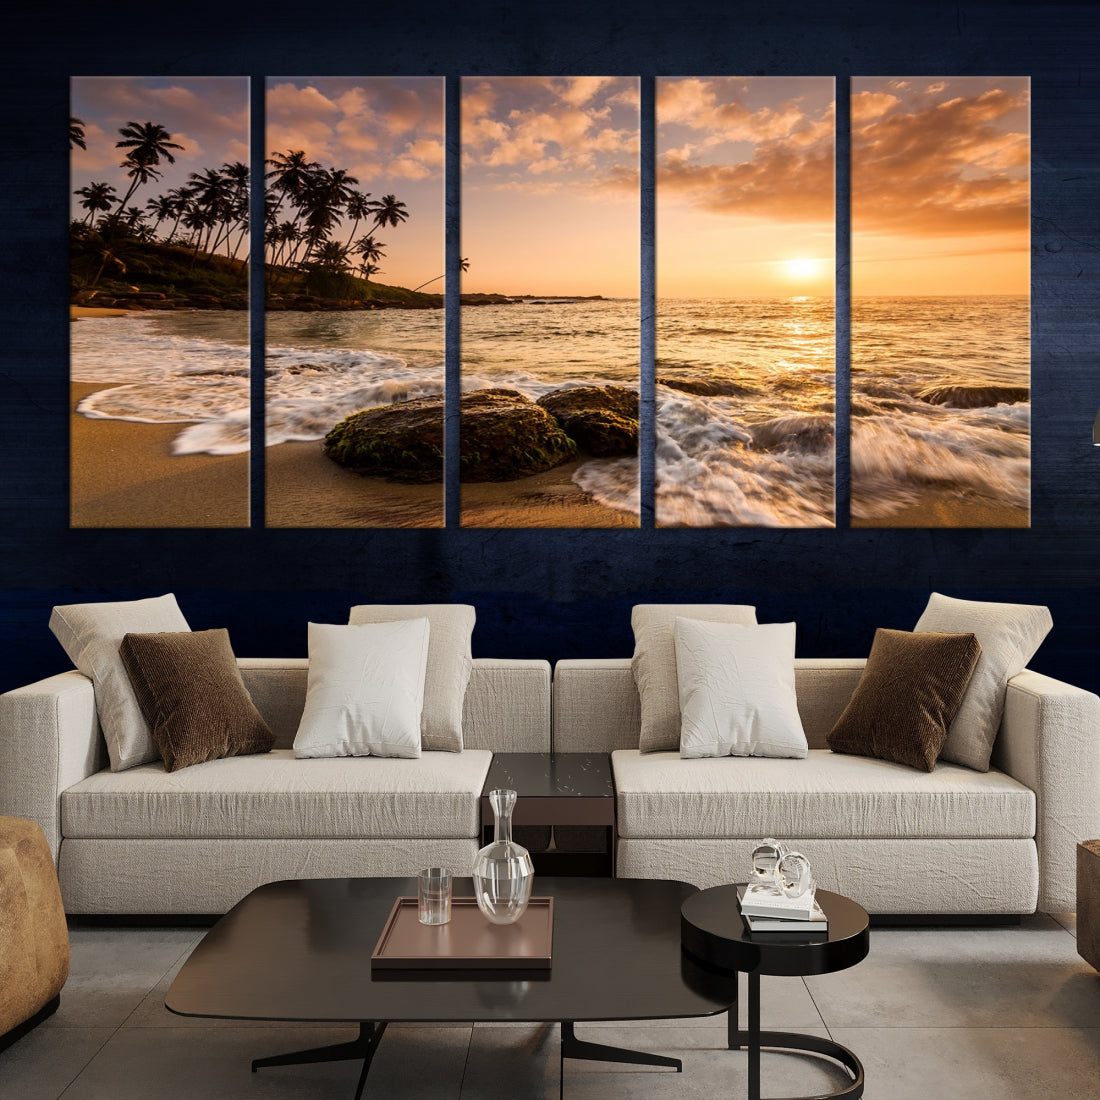 Tropical Island and Sunset Landscape Giclee Print Large Canvas Wall Art